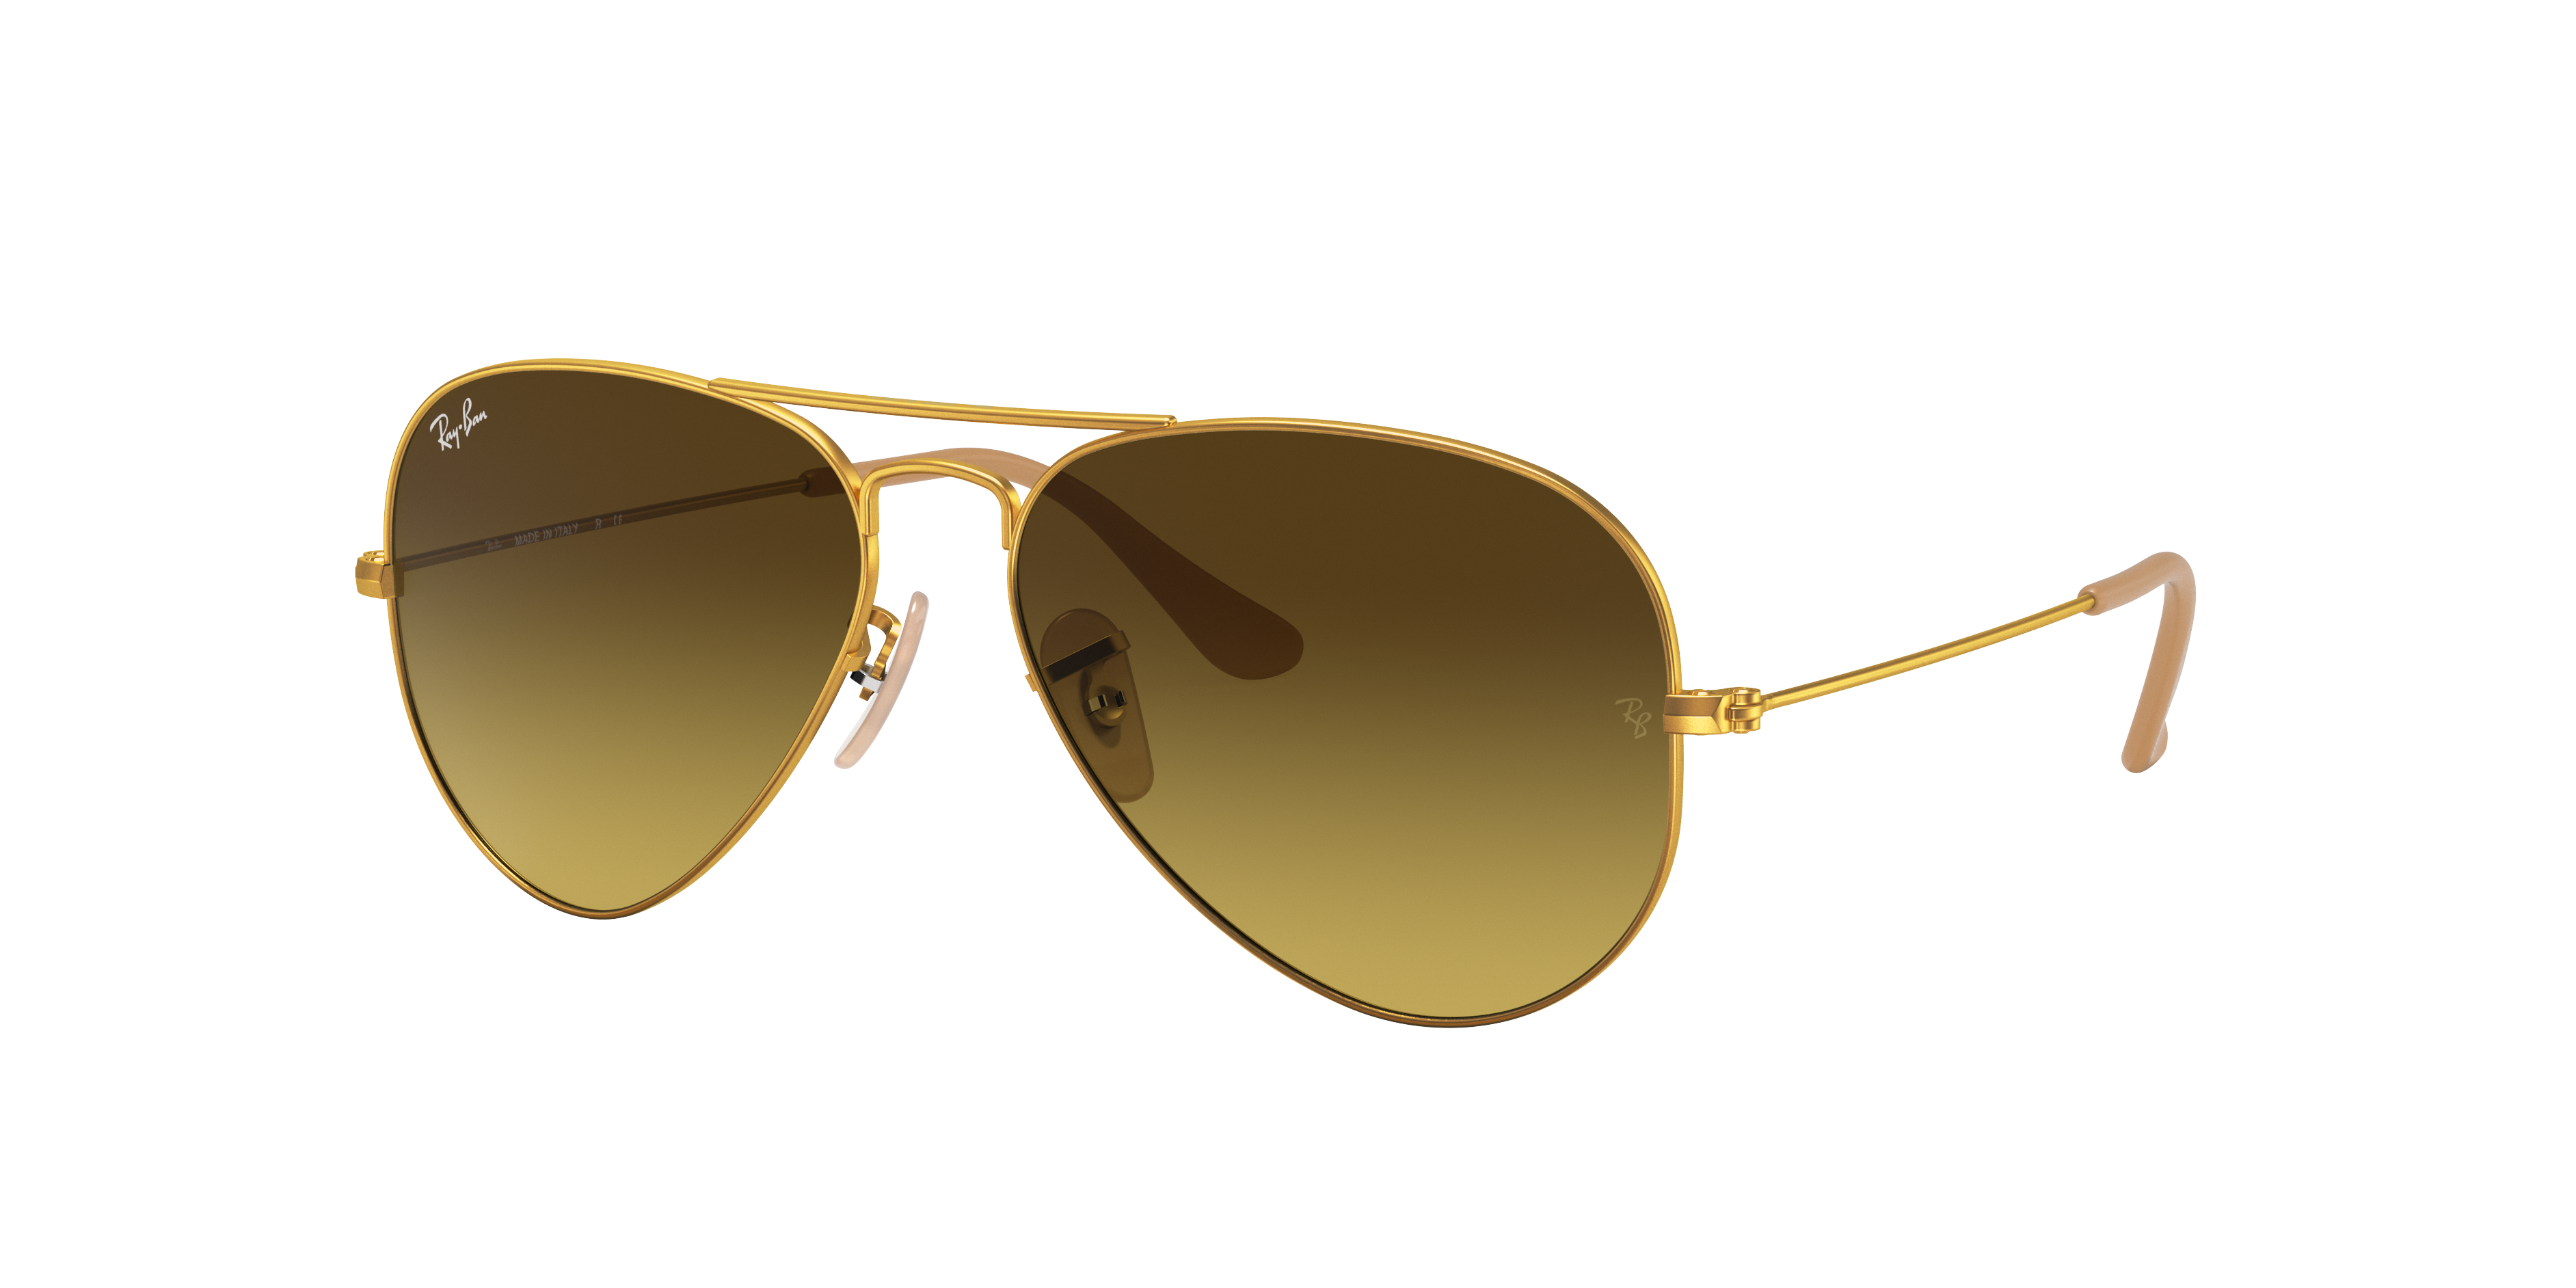 Ray-Ban Aviator 3025 in Brown Womens Accessories Sunglasses 